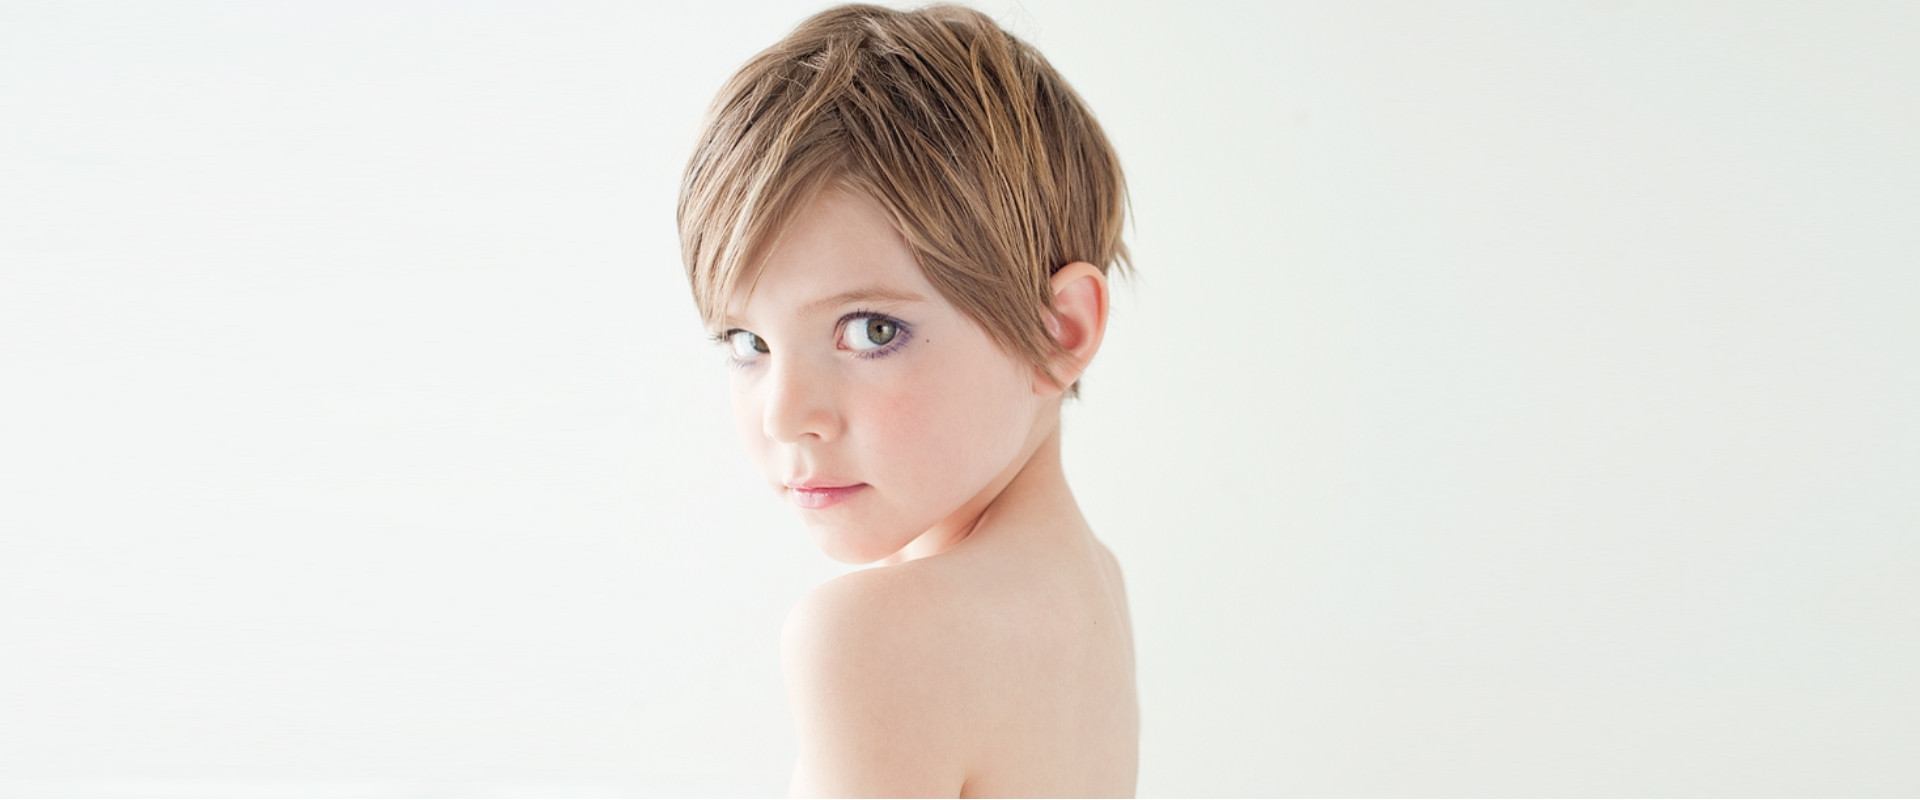 Pixie Haircuts For Little Girls
 5 Pixie Hairstyles For Little Girls To Look Beautiful